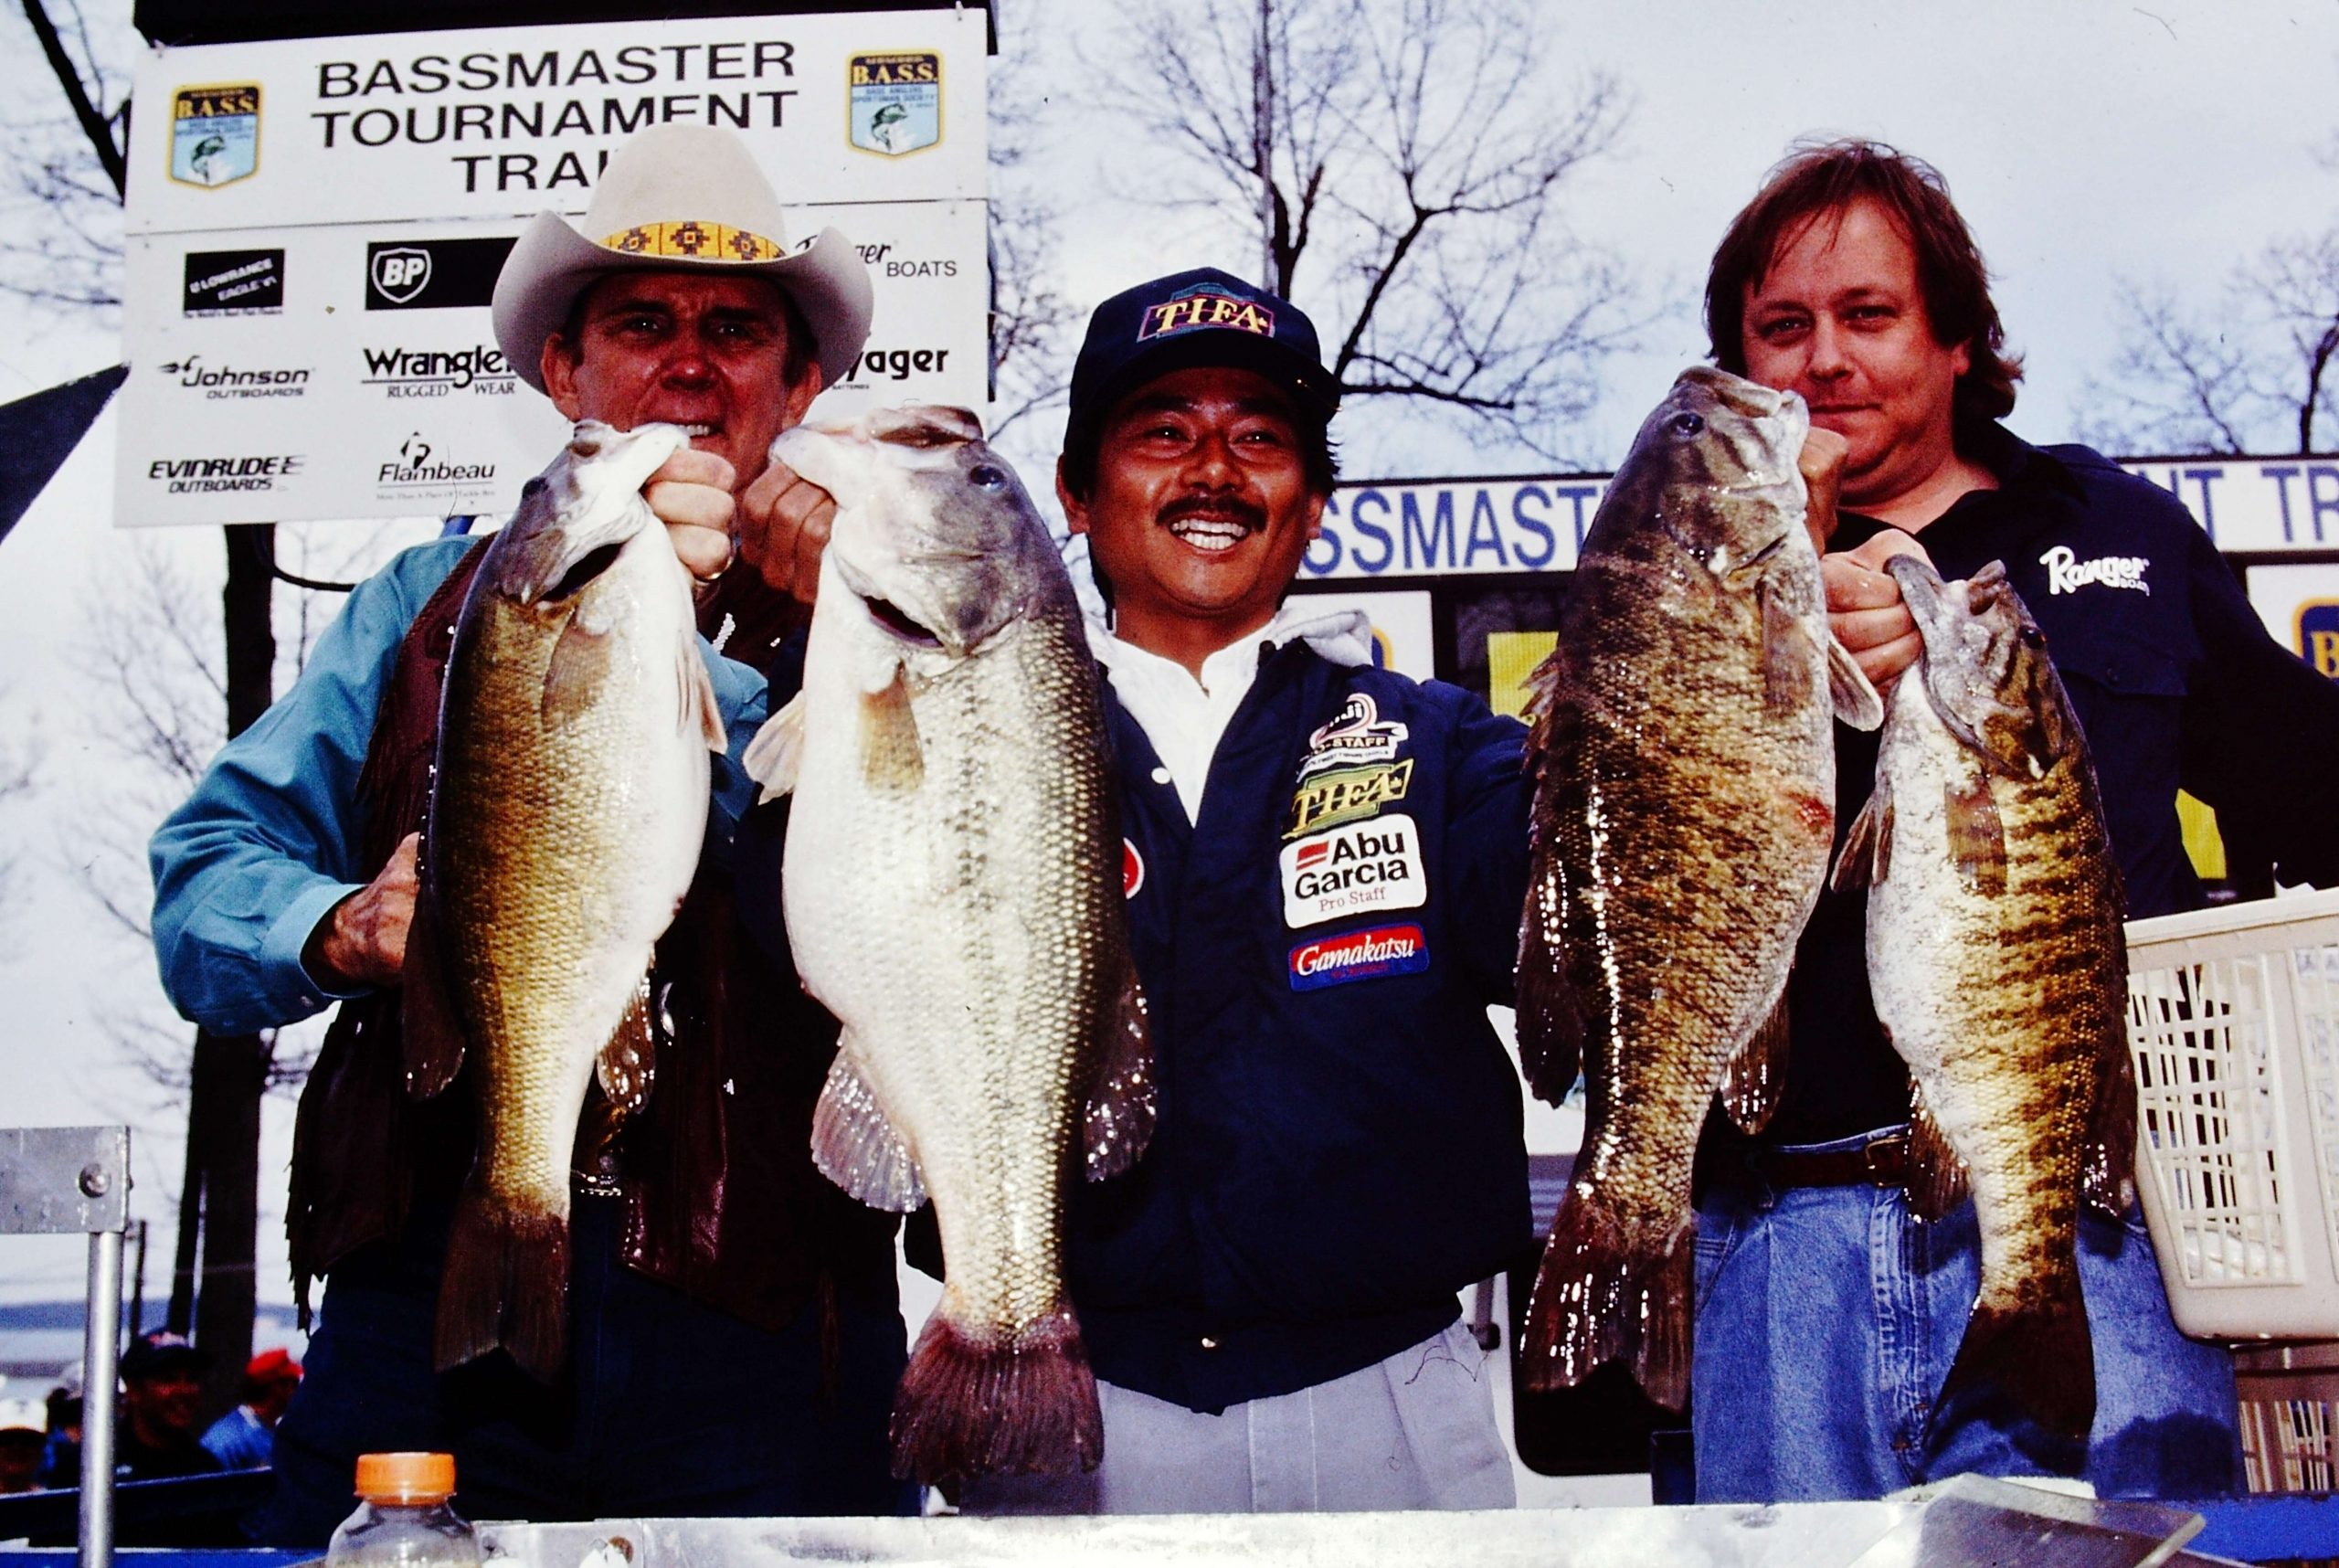 Though he was the first competitor from outside the U.S. to win a major Bassmaster event, Tanabe was an accomplished angler even before fishing with B.A.S.S. He was the Angler of the Year twice in Japan, and he worked for TIFA, a fishing tackle company.